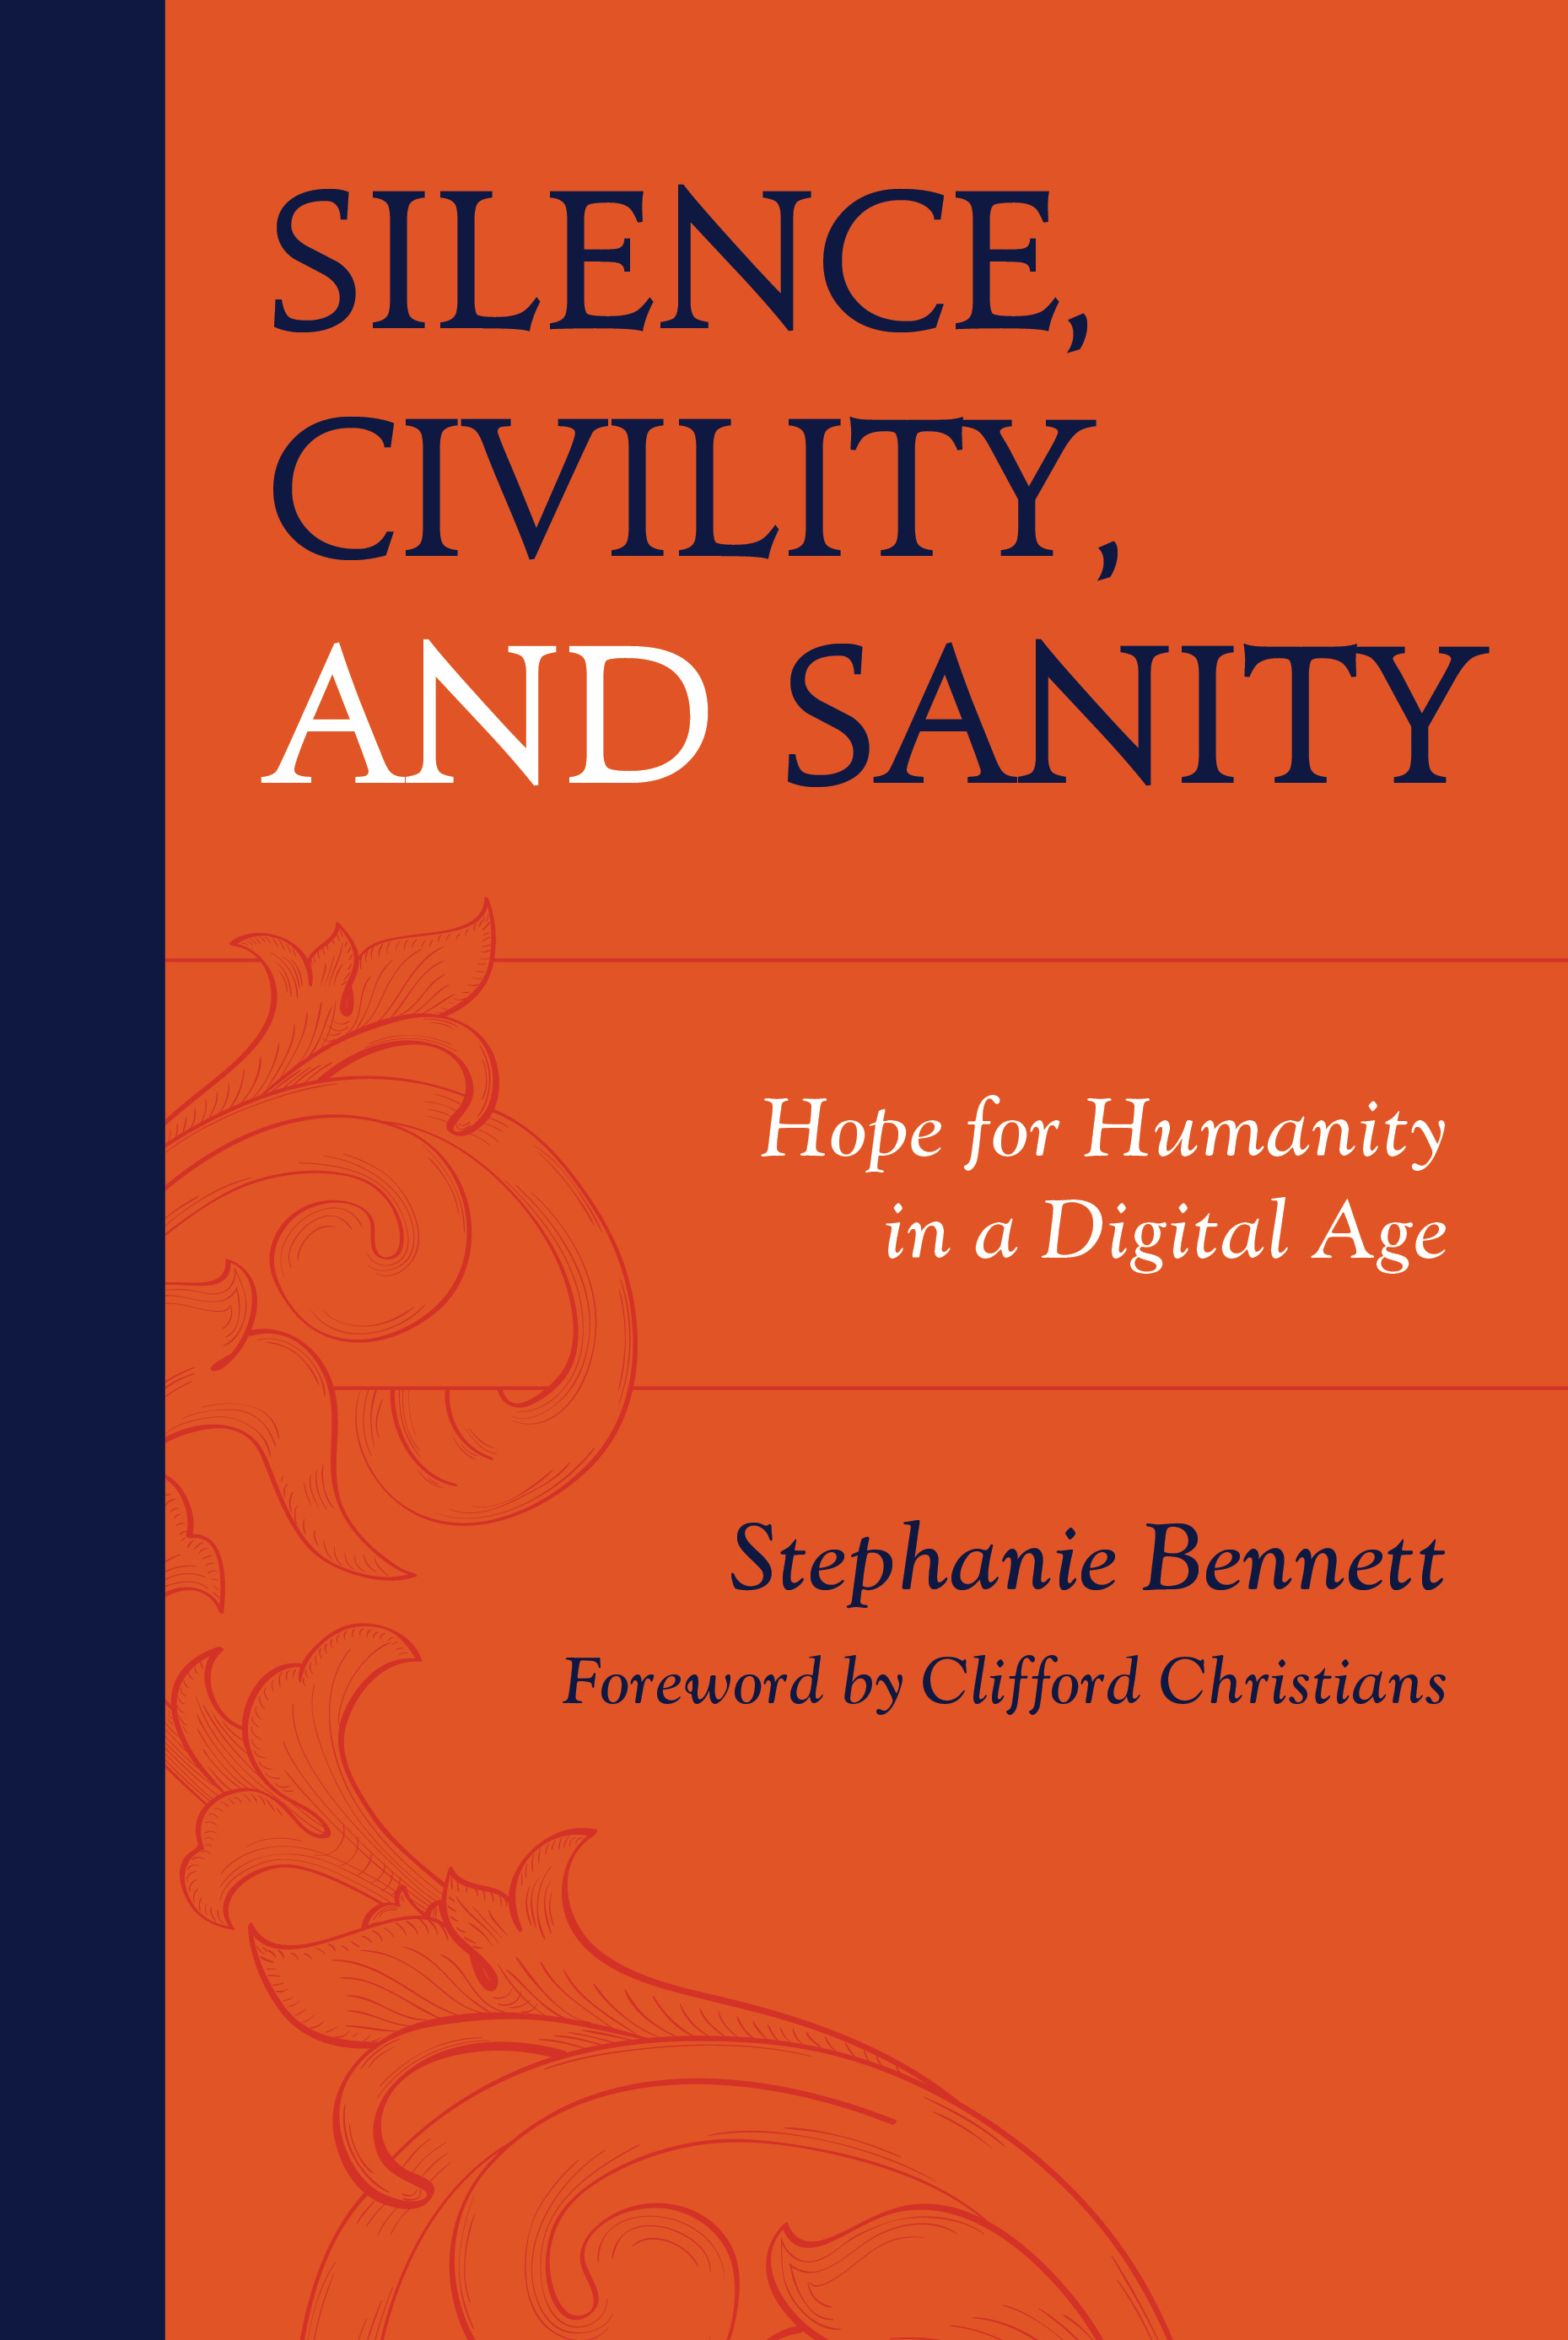 Silence, Civility, and Sanity: Hope for Humanity in a Digital Age